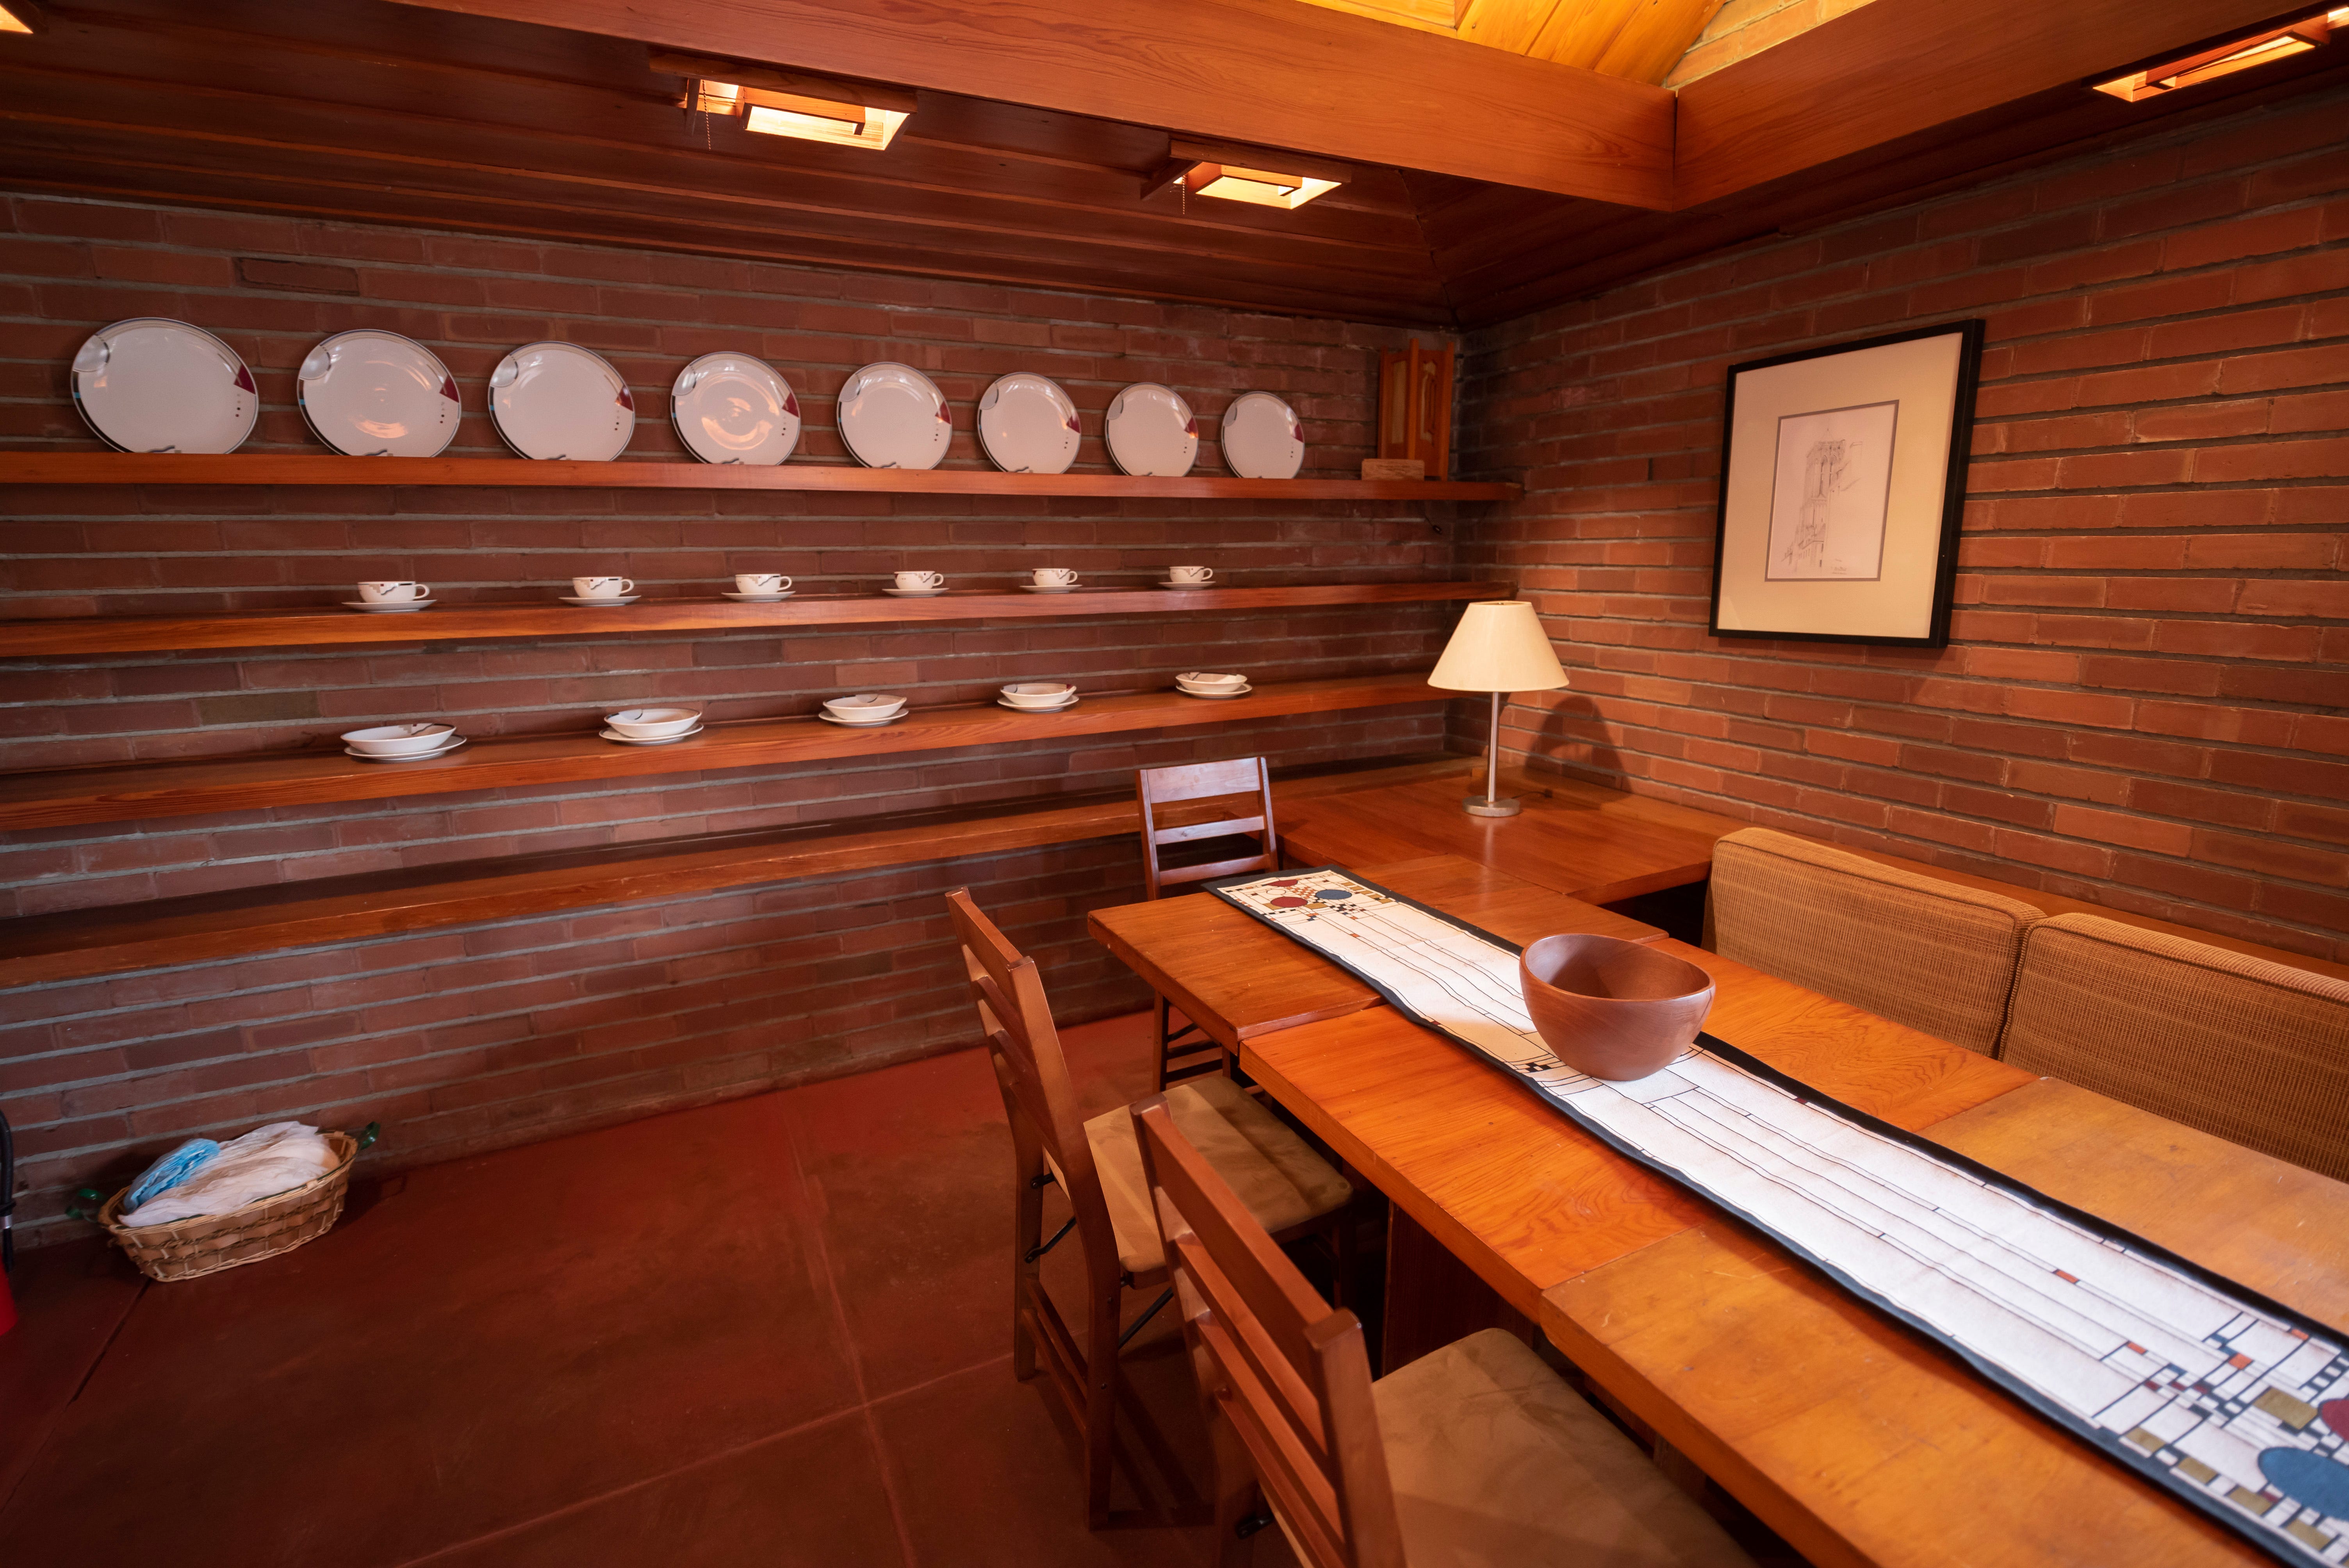 The dining area including shelves built by Wright to display dinnerware.